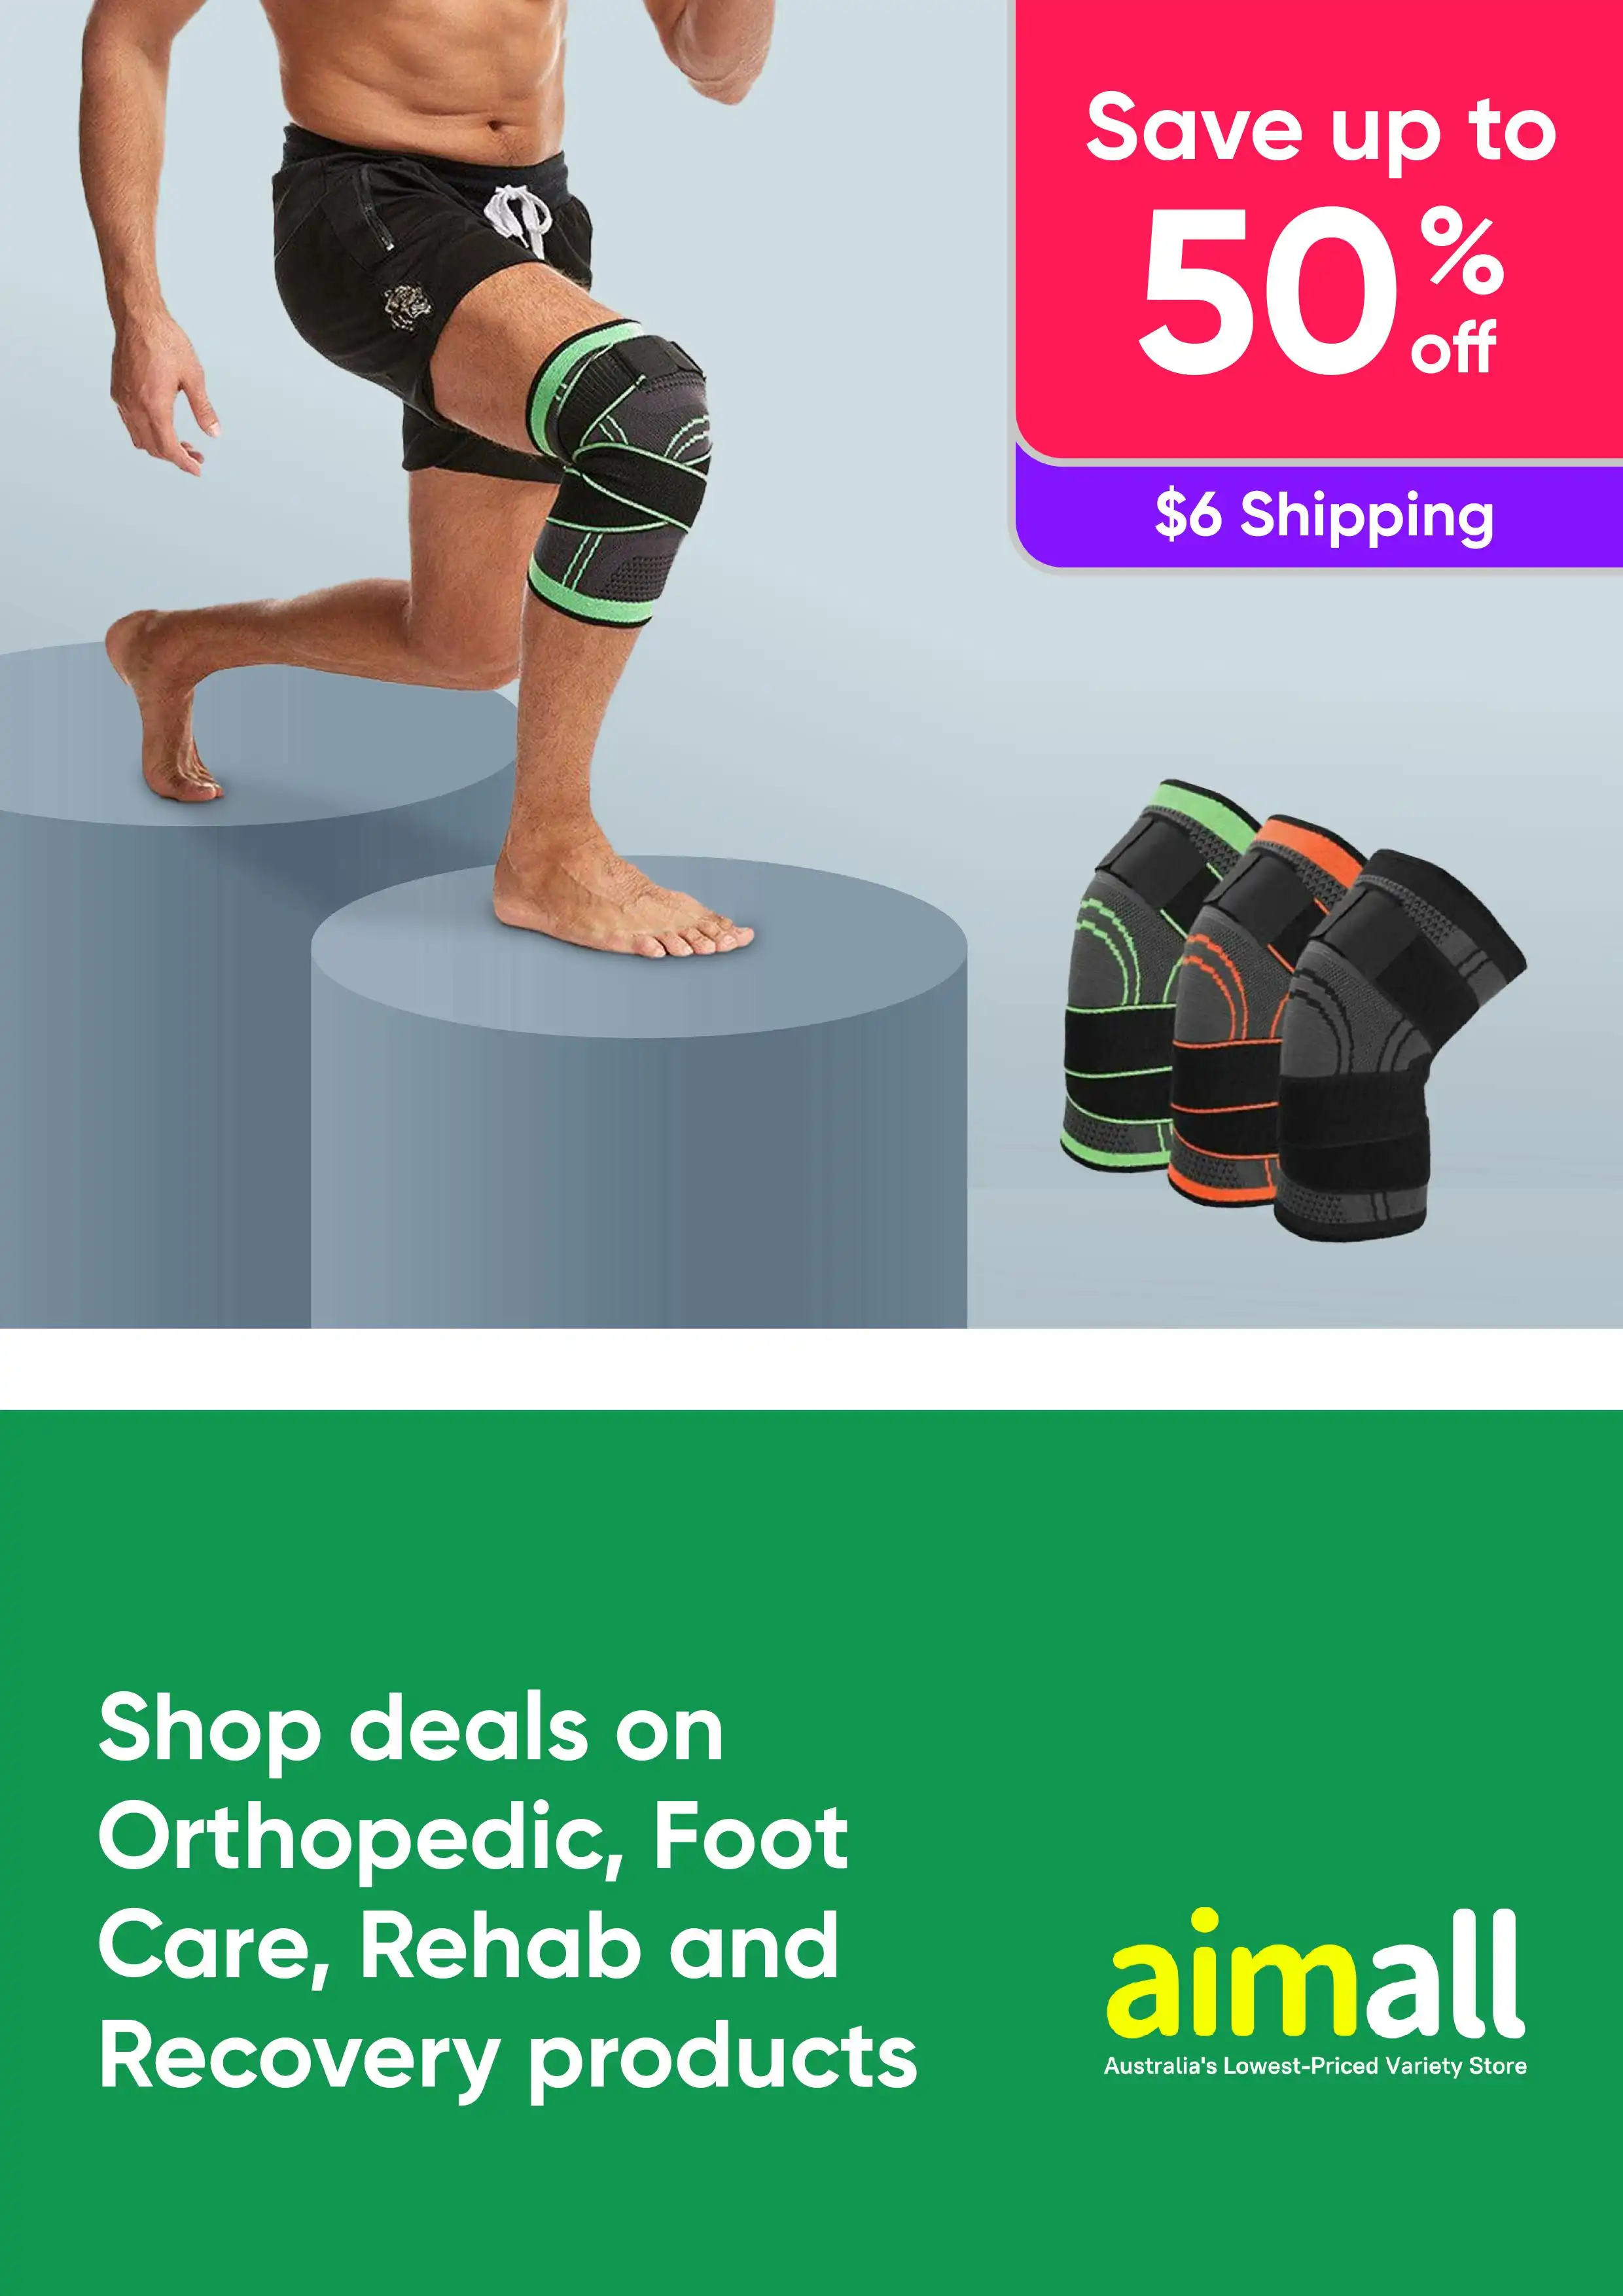 Shop deals on Orthopedic, Foot care, Rehab and Recovery products